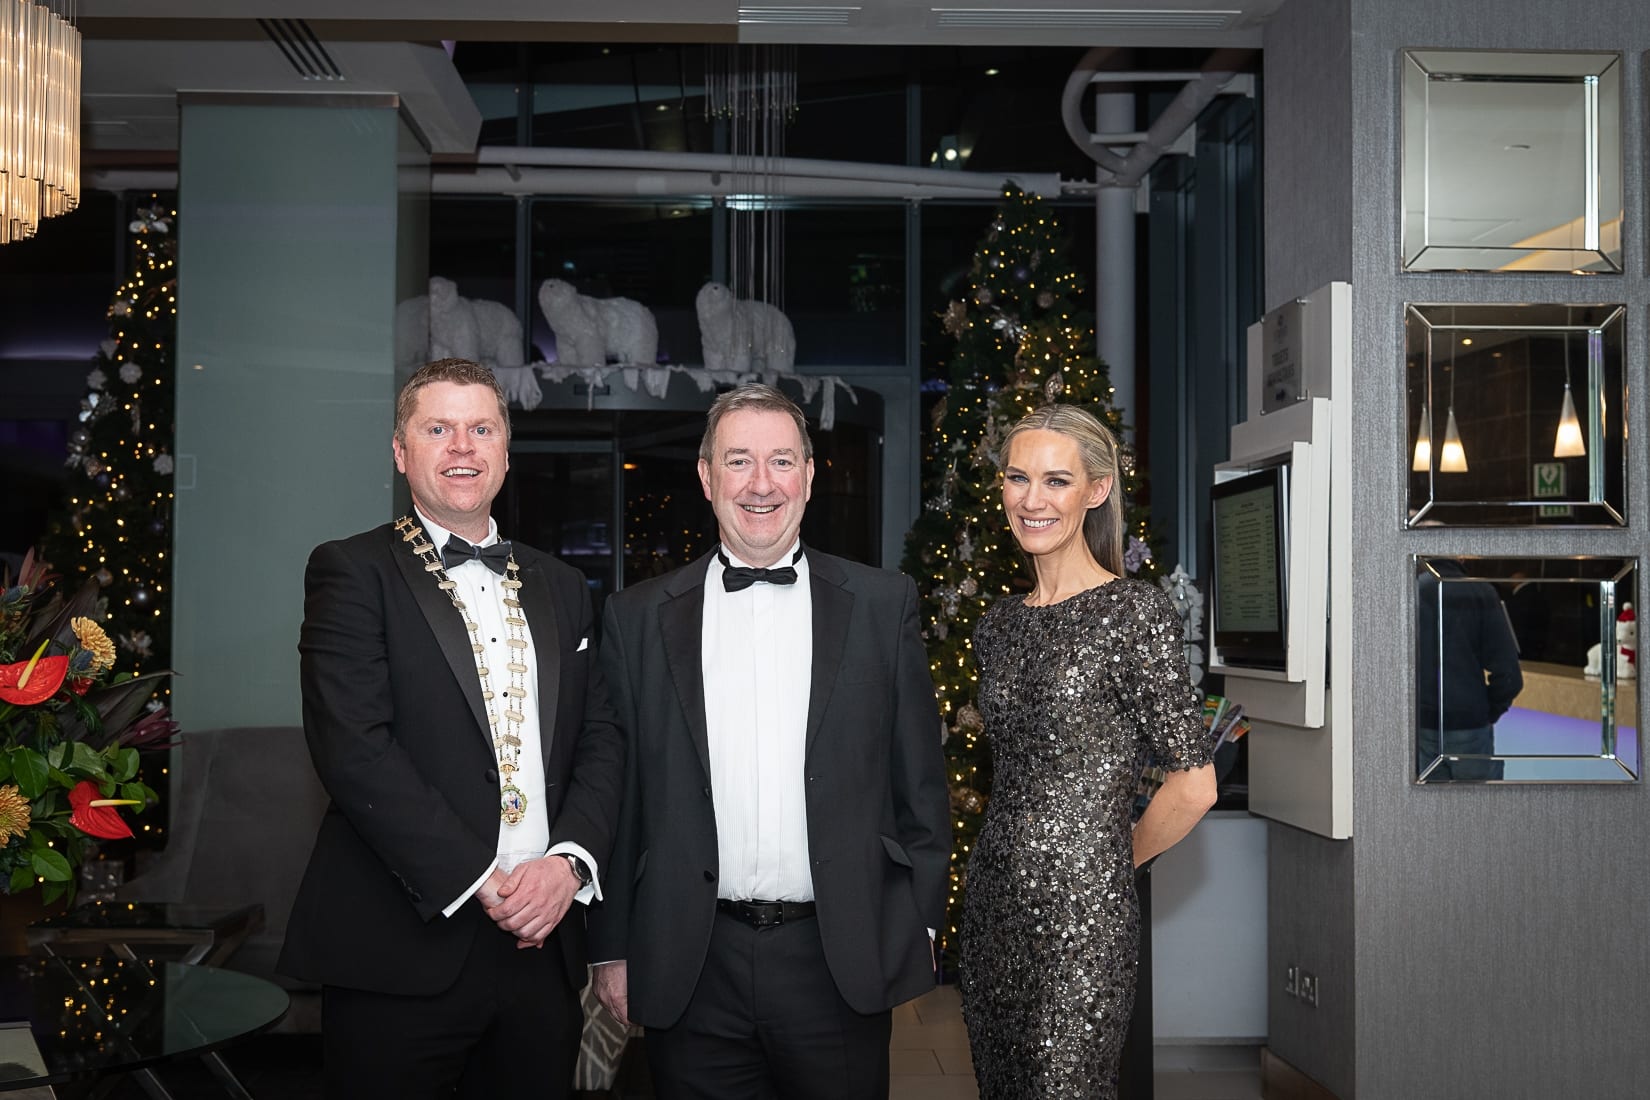 No repro fee-Limerick Chamber President’s Dinner
and Limerick Chamber Regional Business Awards 2019 which was held in the Strand Hotel on Friday 15th November - From Left to Right:  Eoin Ryan - President Limerick Chamber, - LIT, Denis Doyle - OVERALL WINNER /  Analog Devices,    Dee Ryan - CEO Limerick Chamber, 
Photo credit Shauna Kennedy